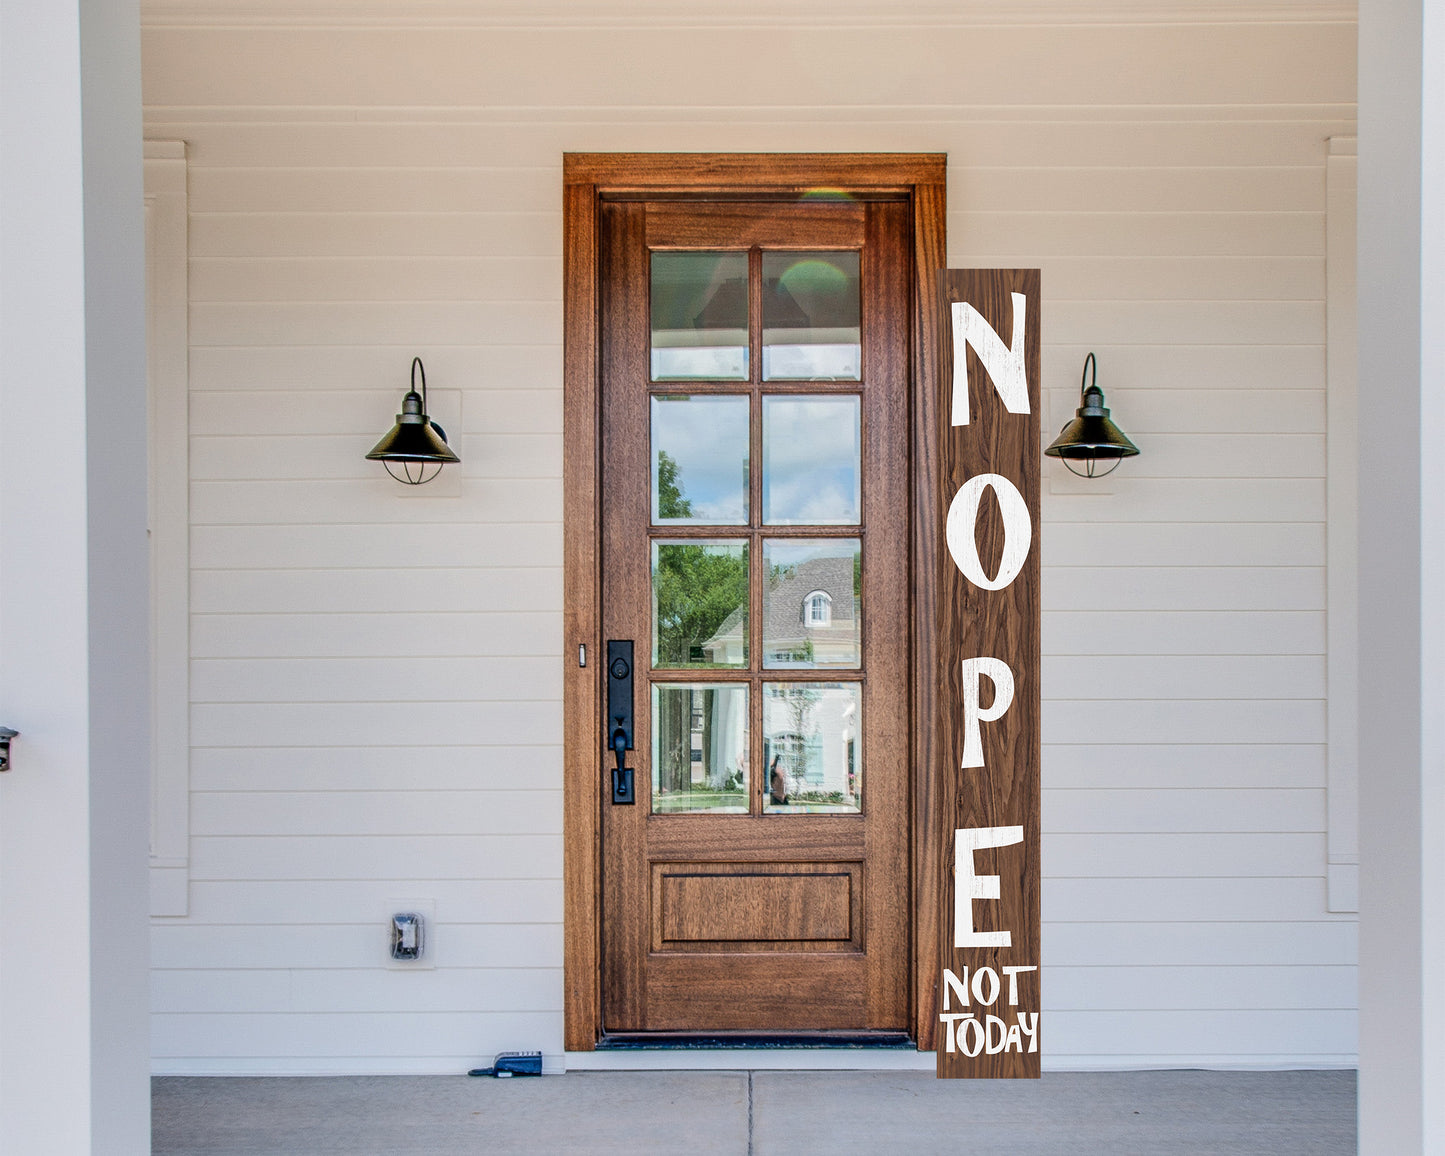 72-Inch Wooden "Nope, Not Today" Porch Sign for Front Door, Brown Standing Porch Sign with Foldable Design